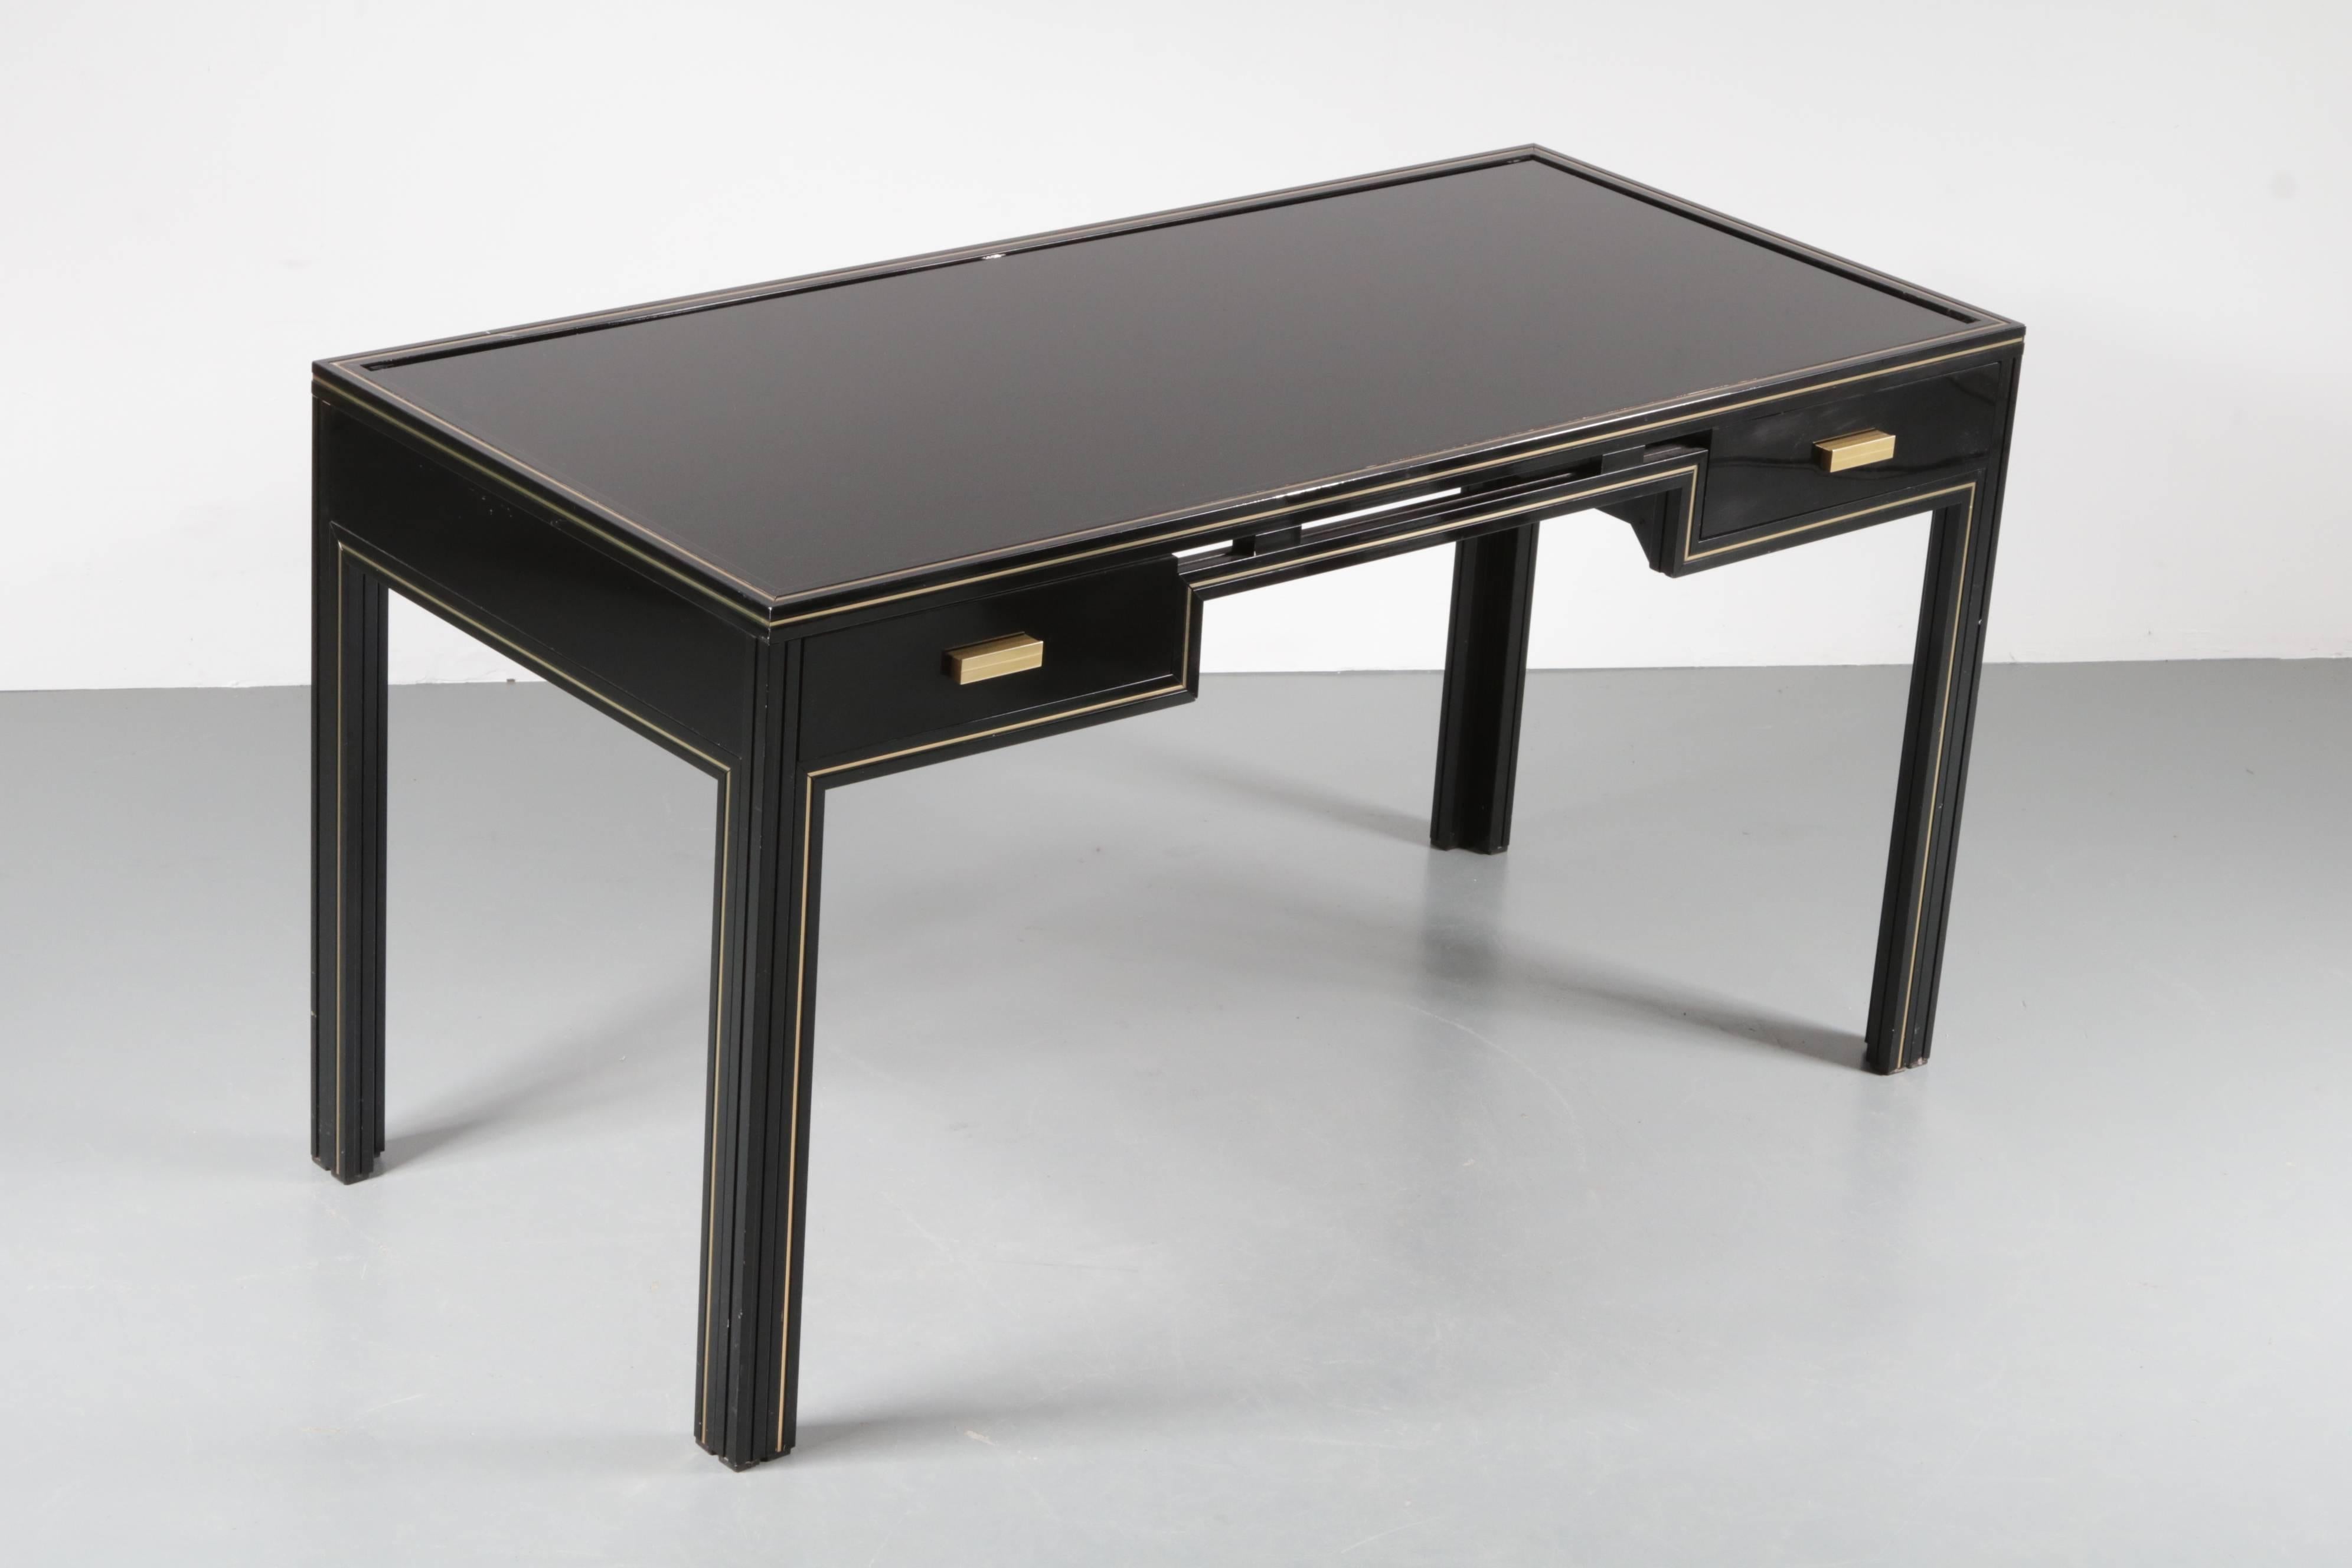 A truly elegant desk designed by Pierre Vandel, manufactured in Paris in the 1970s.

This luxurious piece is made of high quality black lacquered metal with beautiful brass details. The desk has a Minimalist design that is beautifully complimented